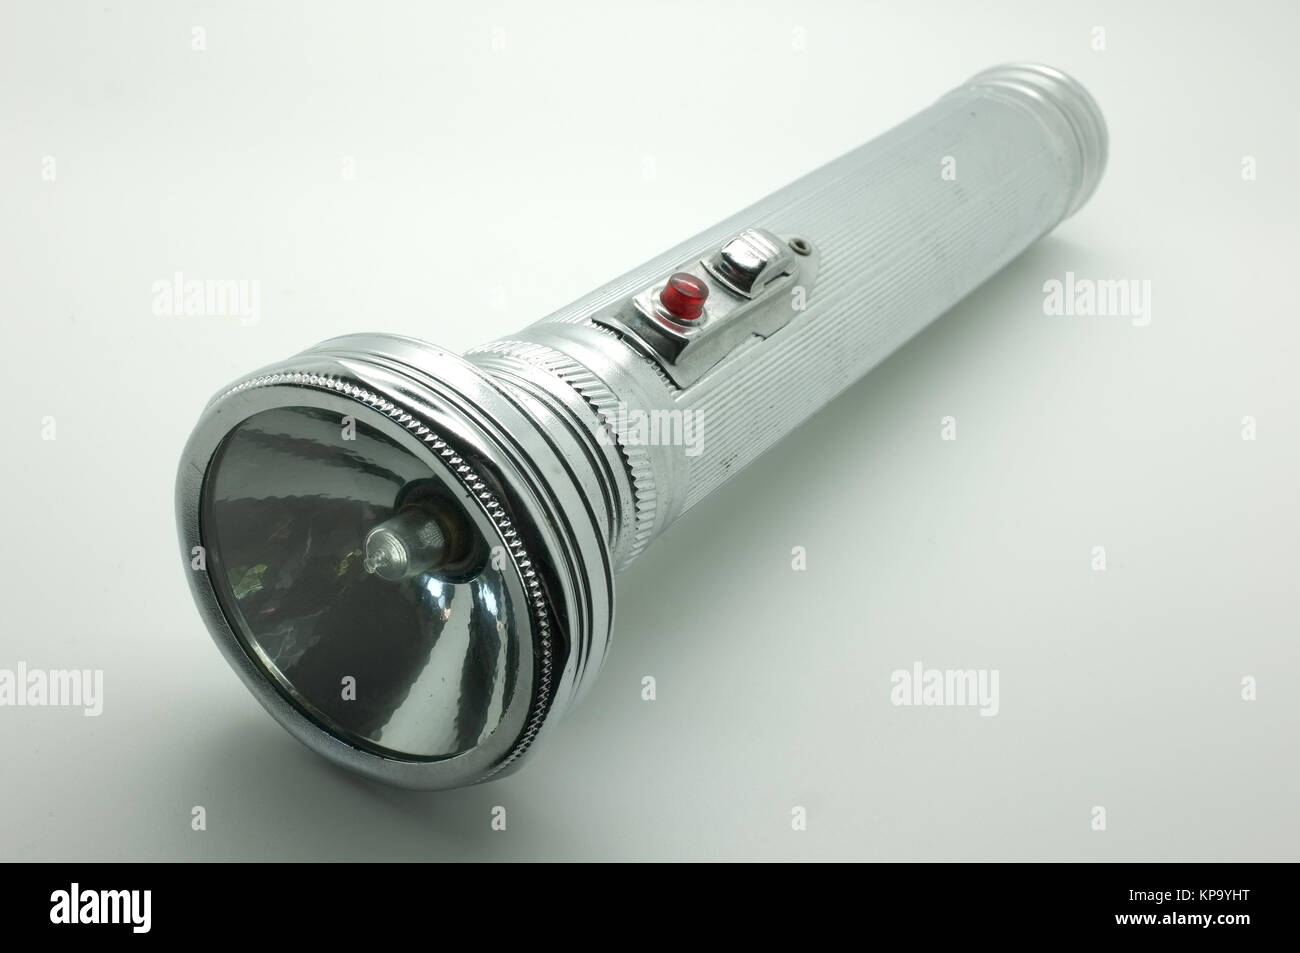 Old metal flashlight, silver torch Stock Photo